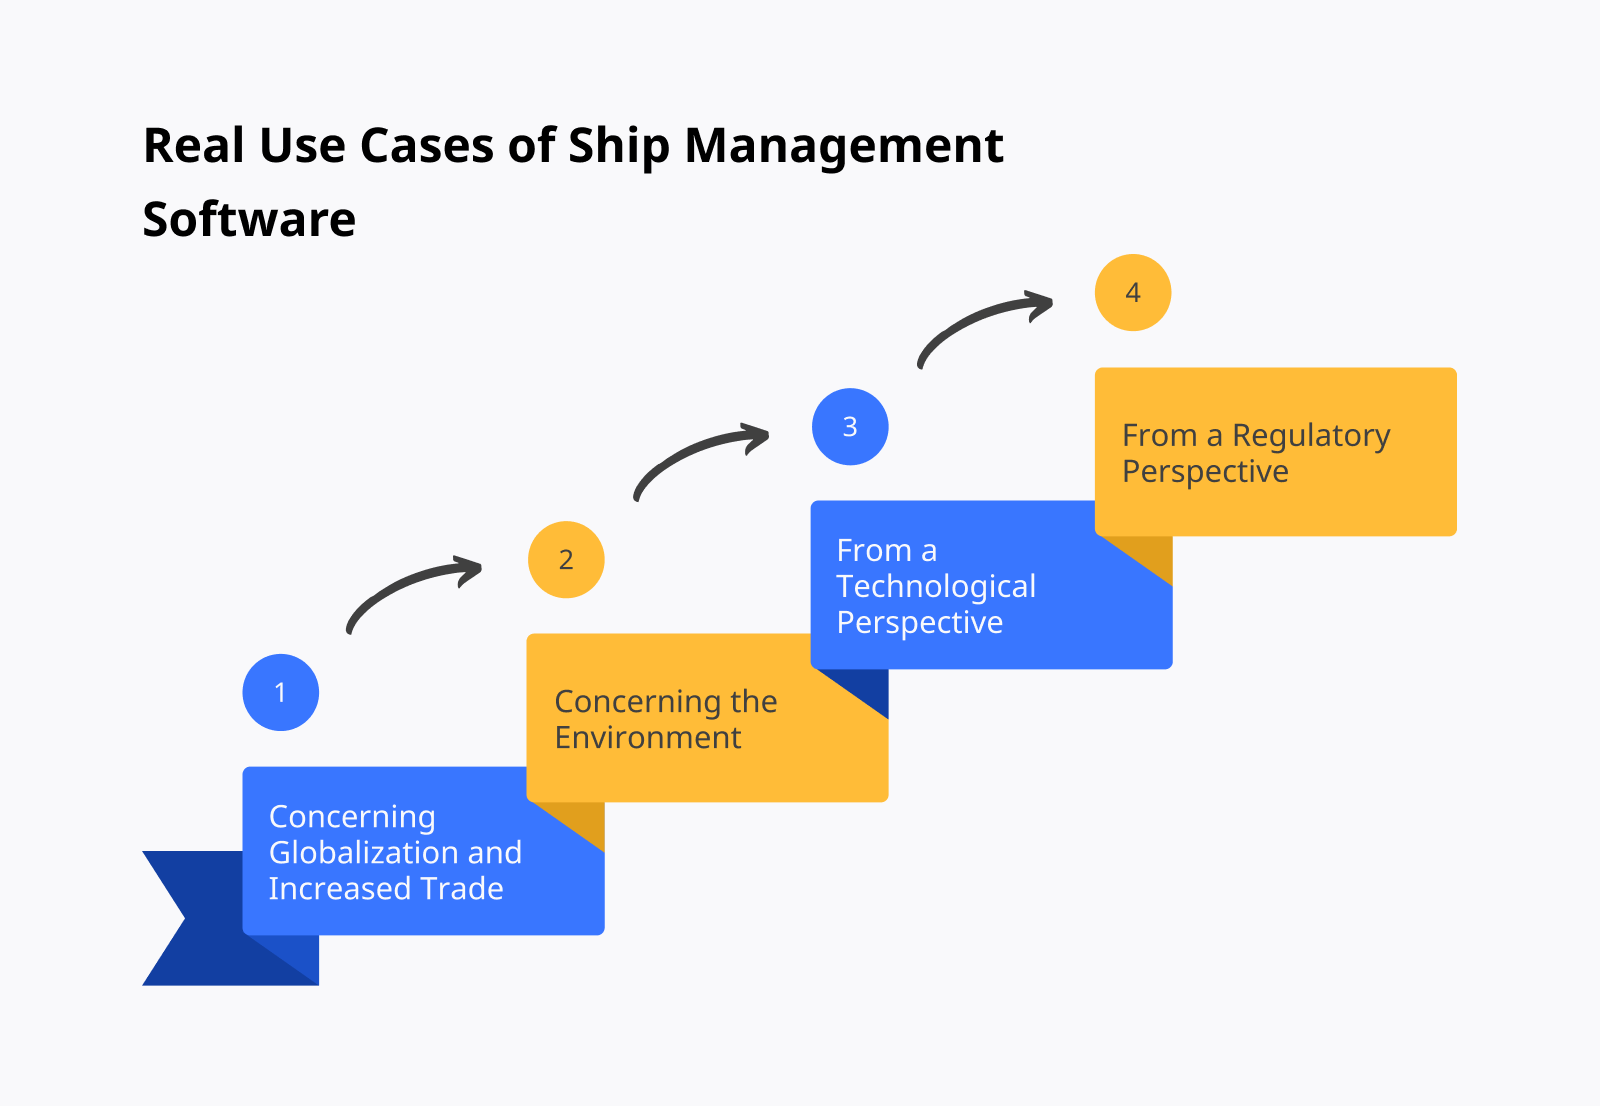 Real Use Cases of Ship Management Software